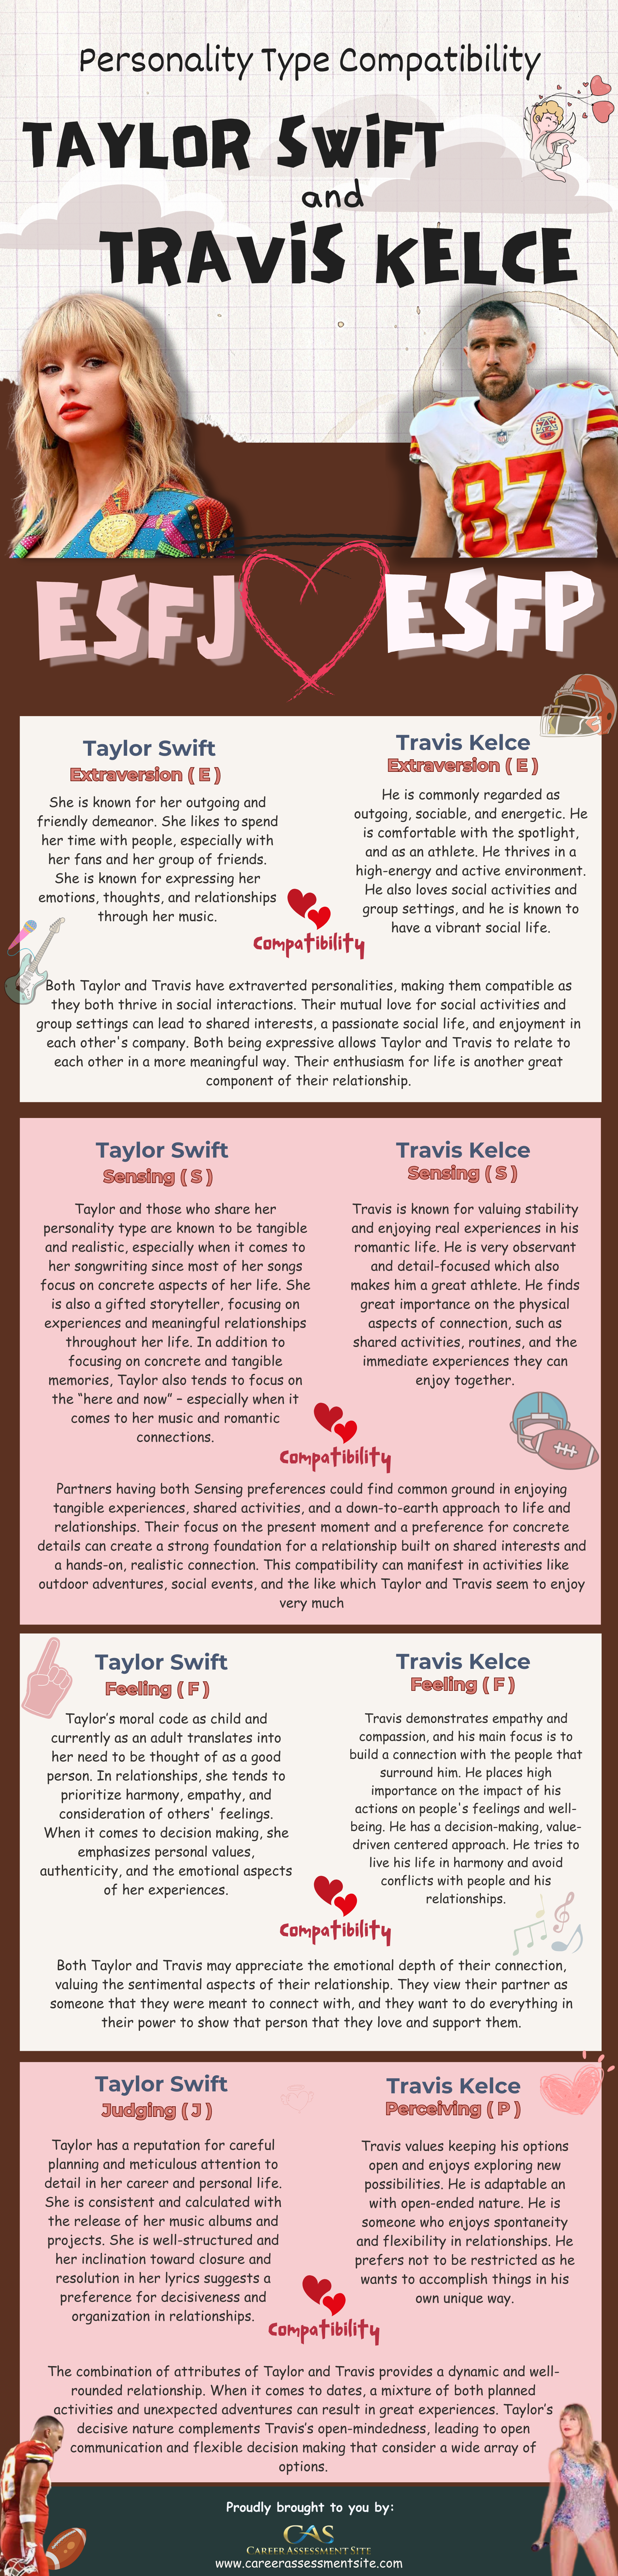 Taylor Swift and Travis Kelce Personality Compatibility